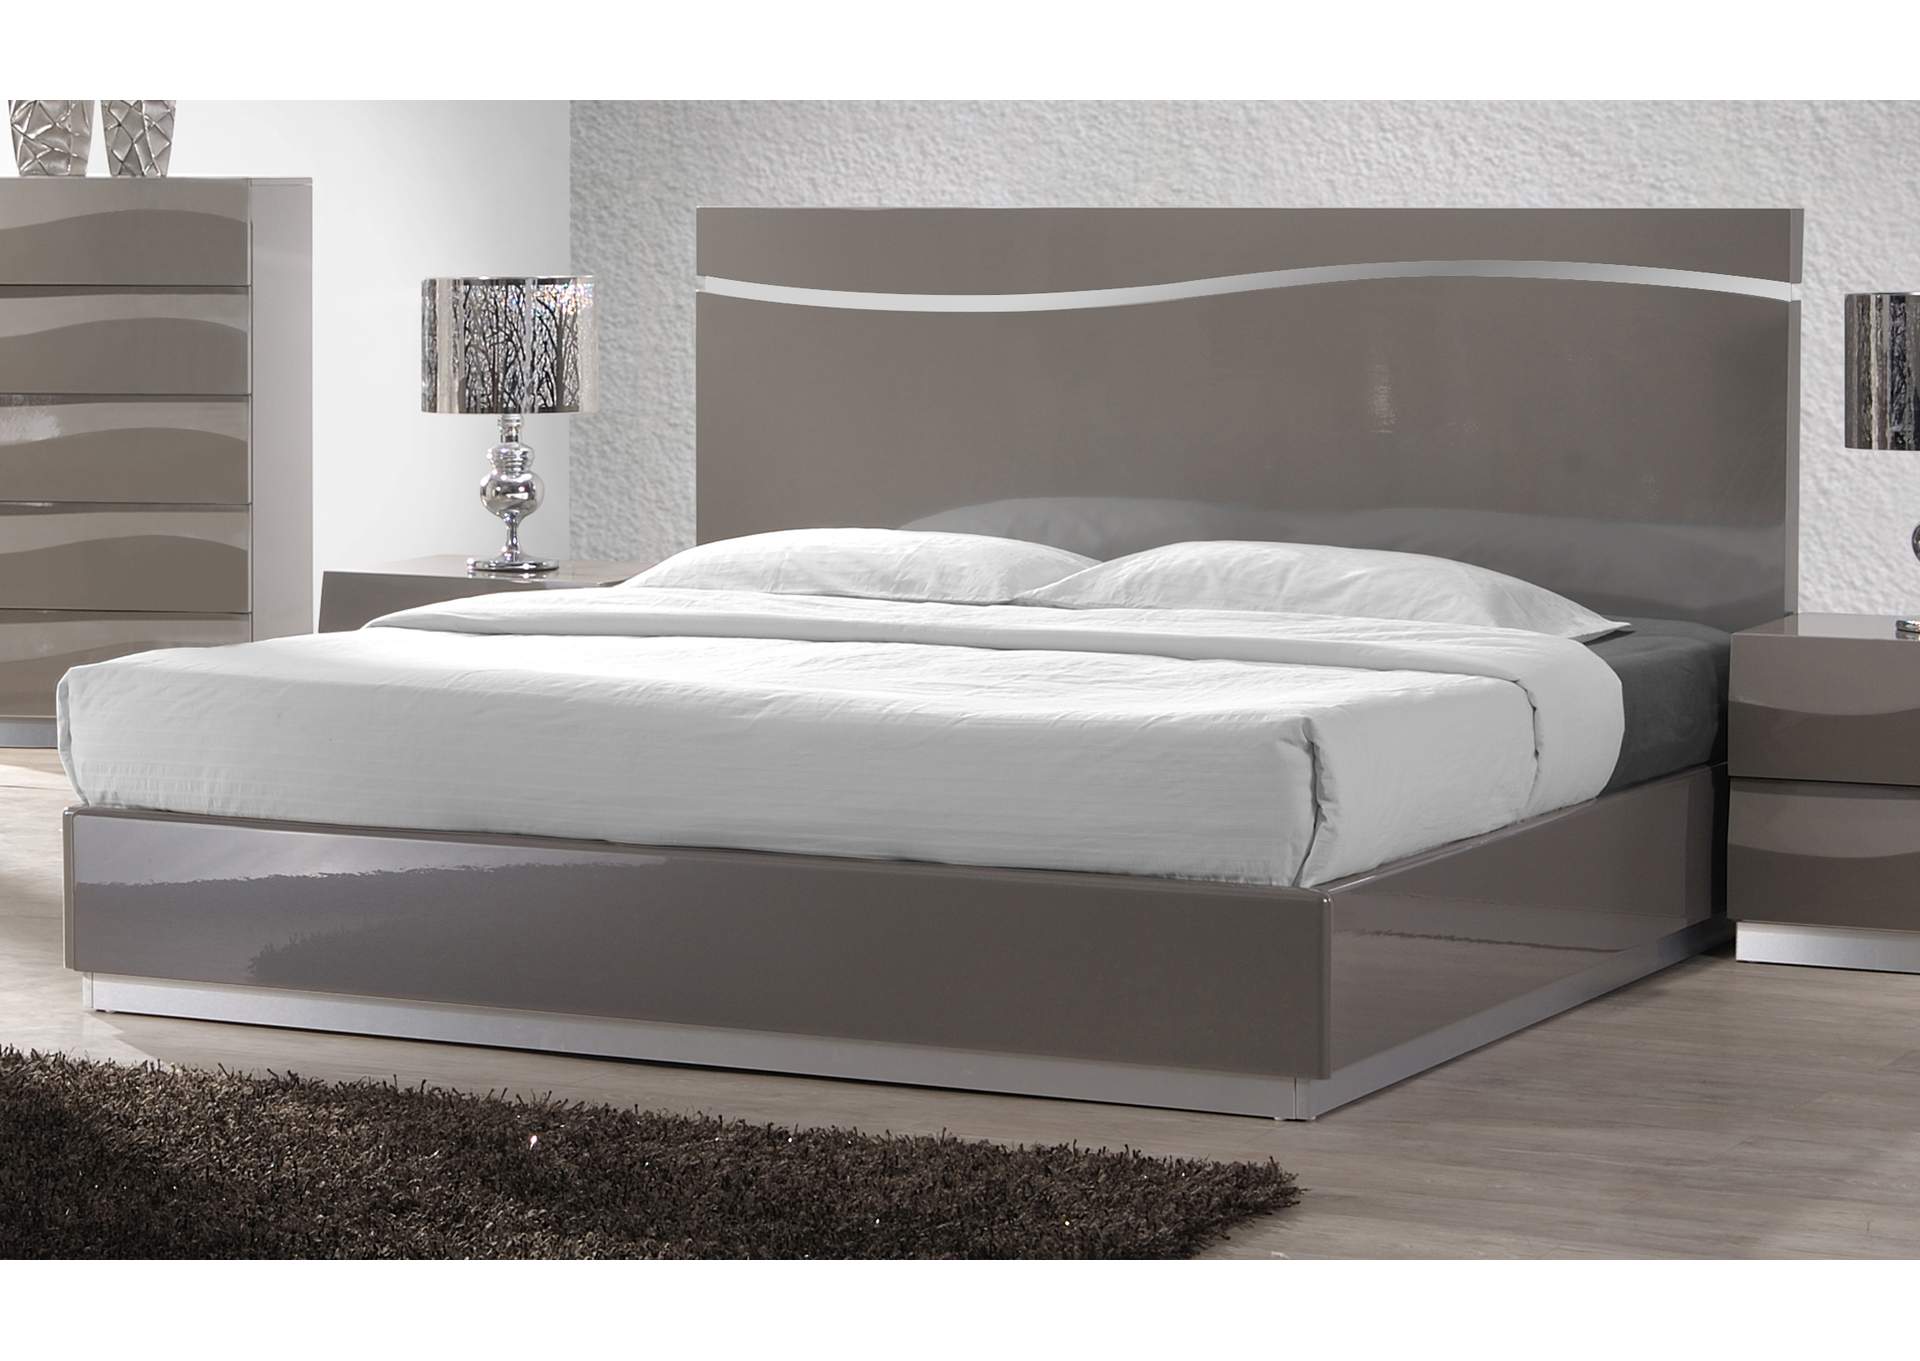 Delhi Gray Contemporary High Gloss Queen Bed,Chintaly Imports